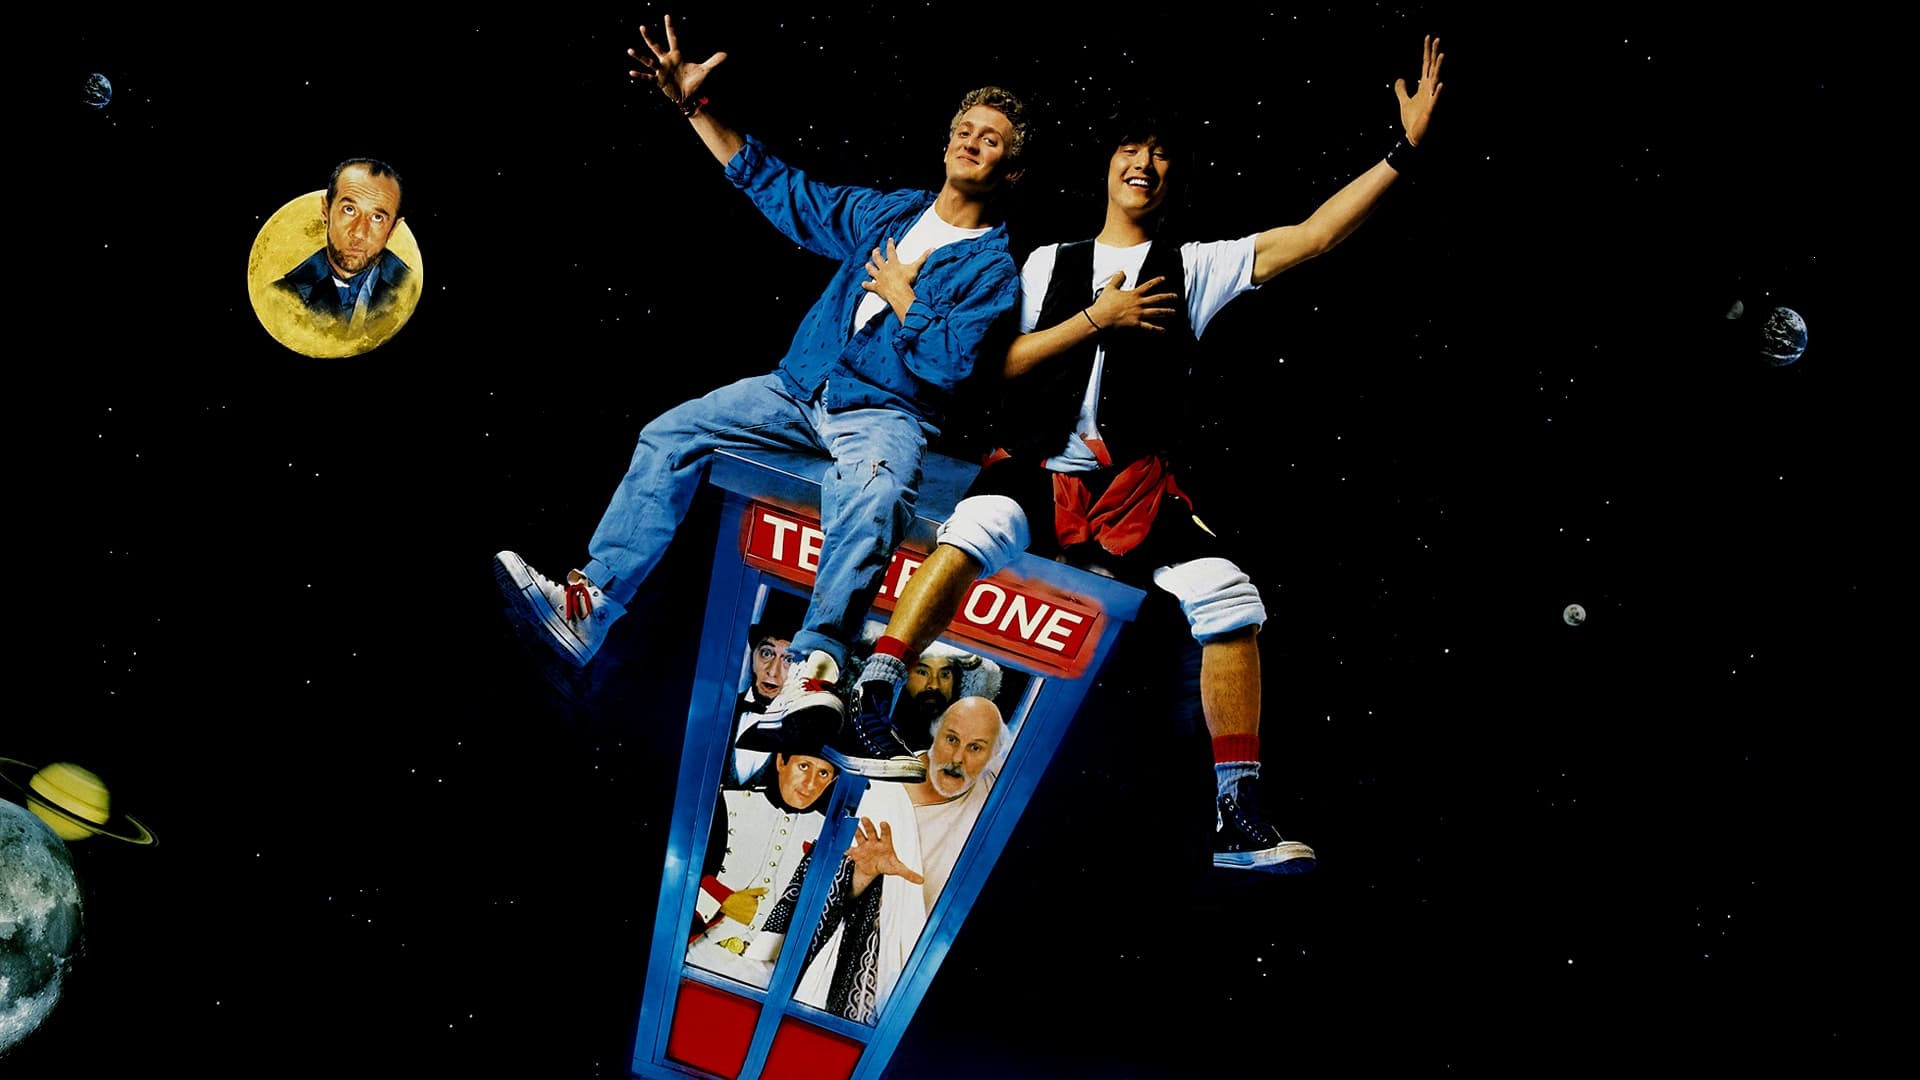 Bill & Ted's Excellent Adventure (1989)